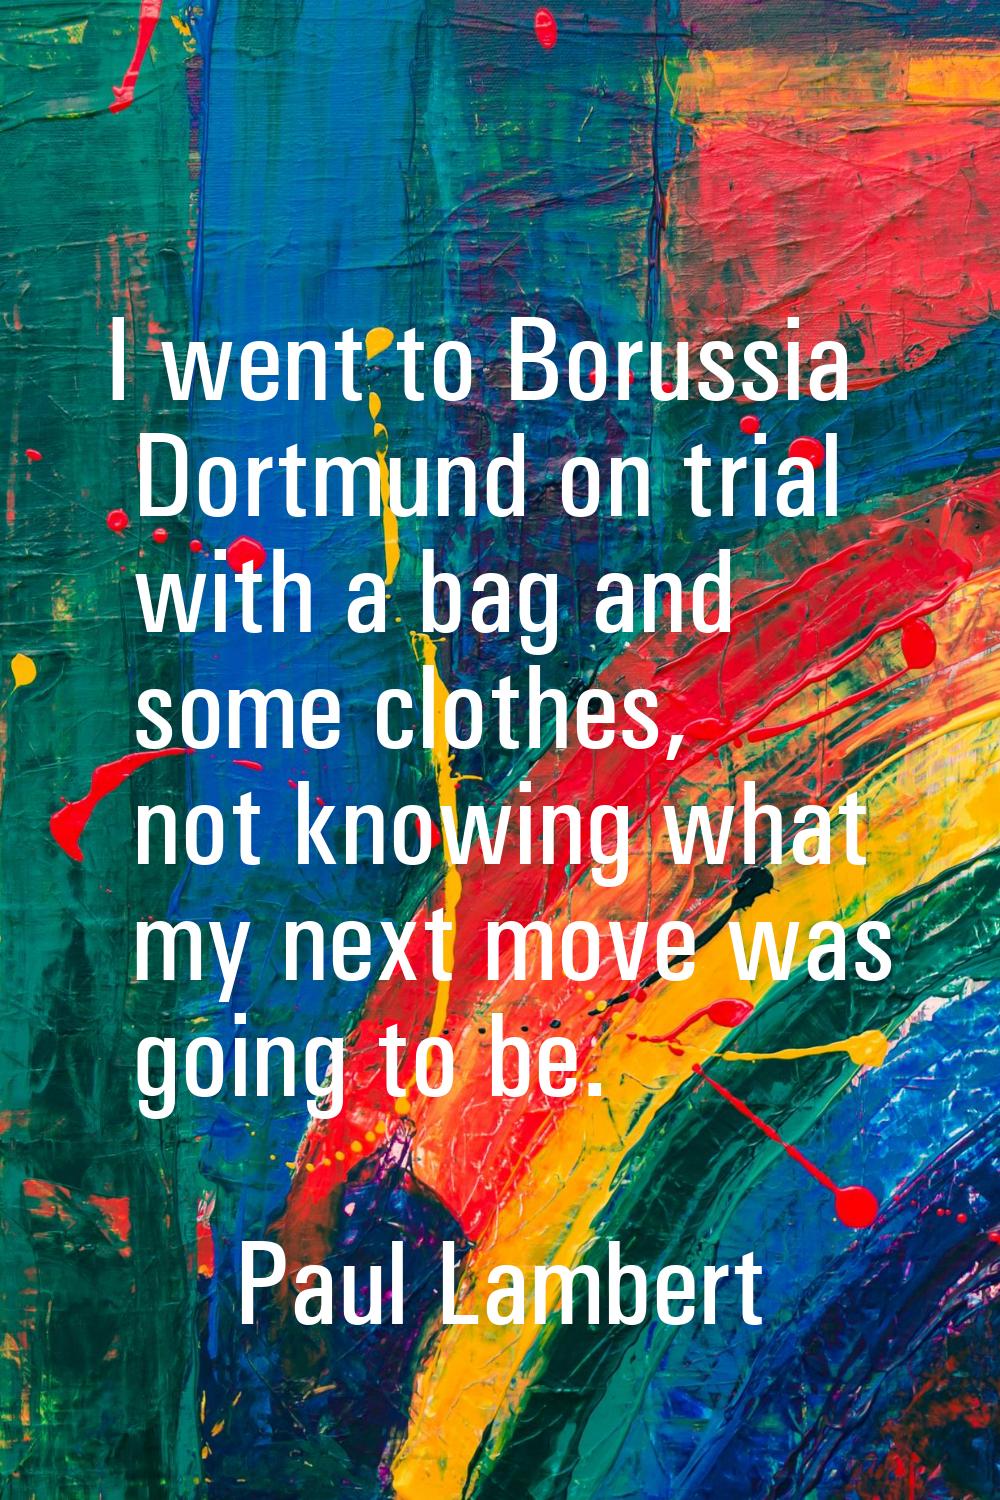 I went to Borussia Dortmund on trial with a bag and some clothes, not knowing what my next move was